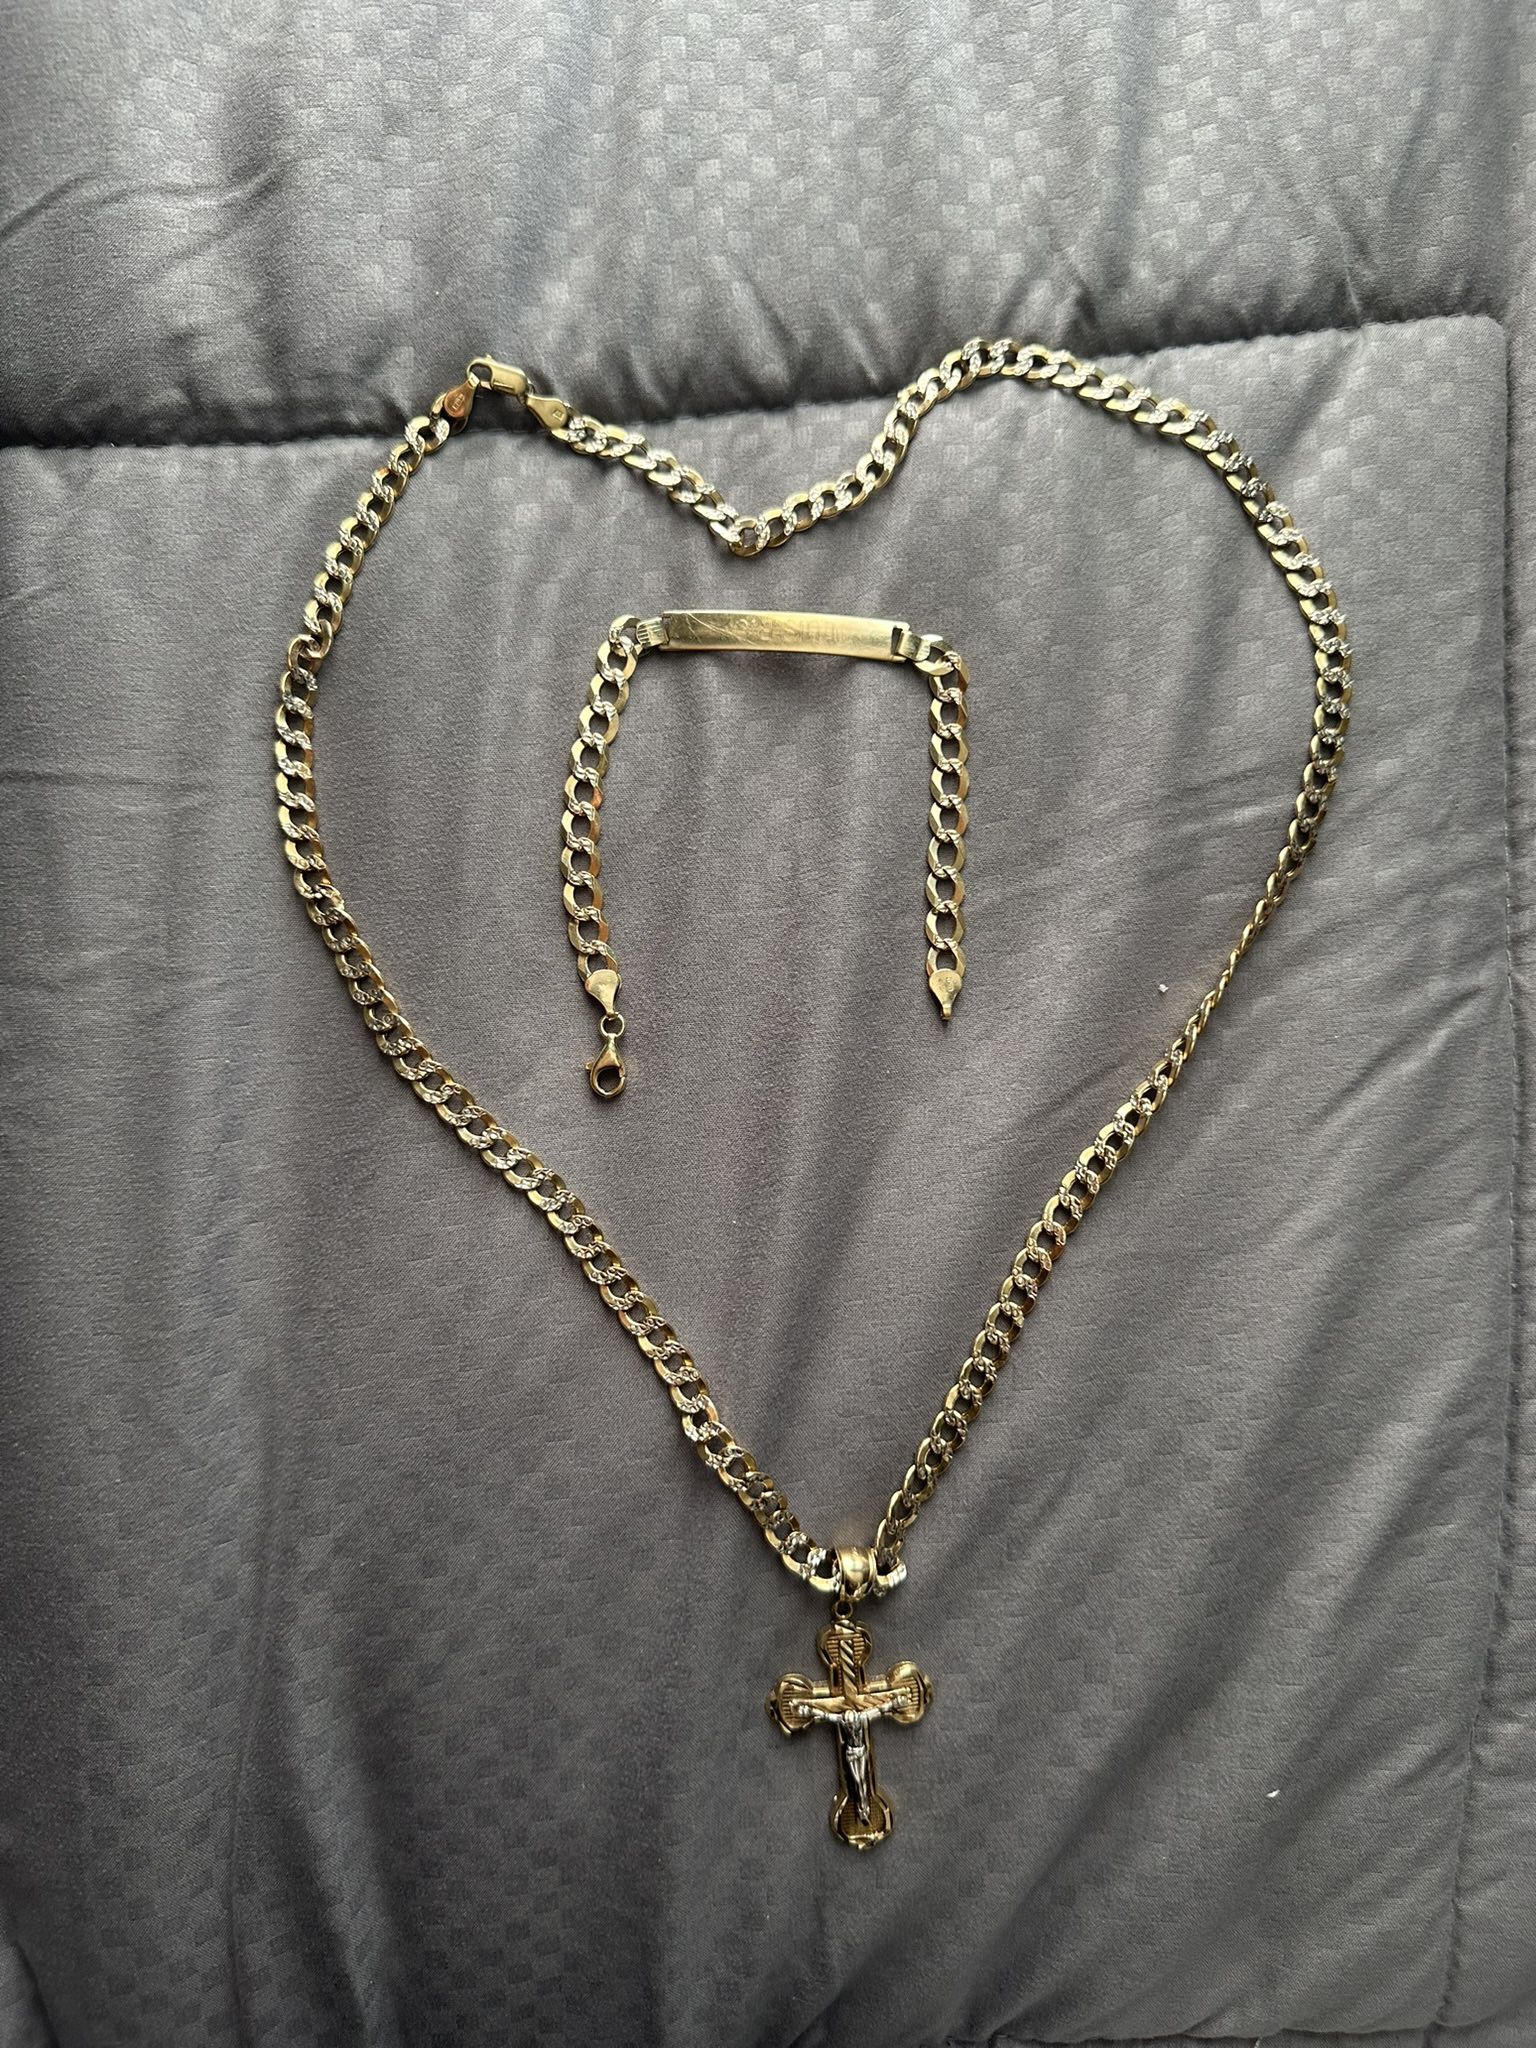 10k Italy Gold Chain And Bracelet